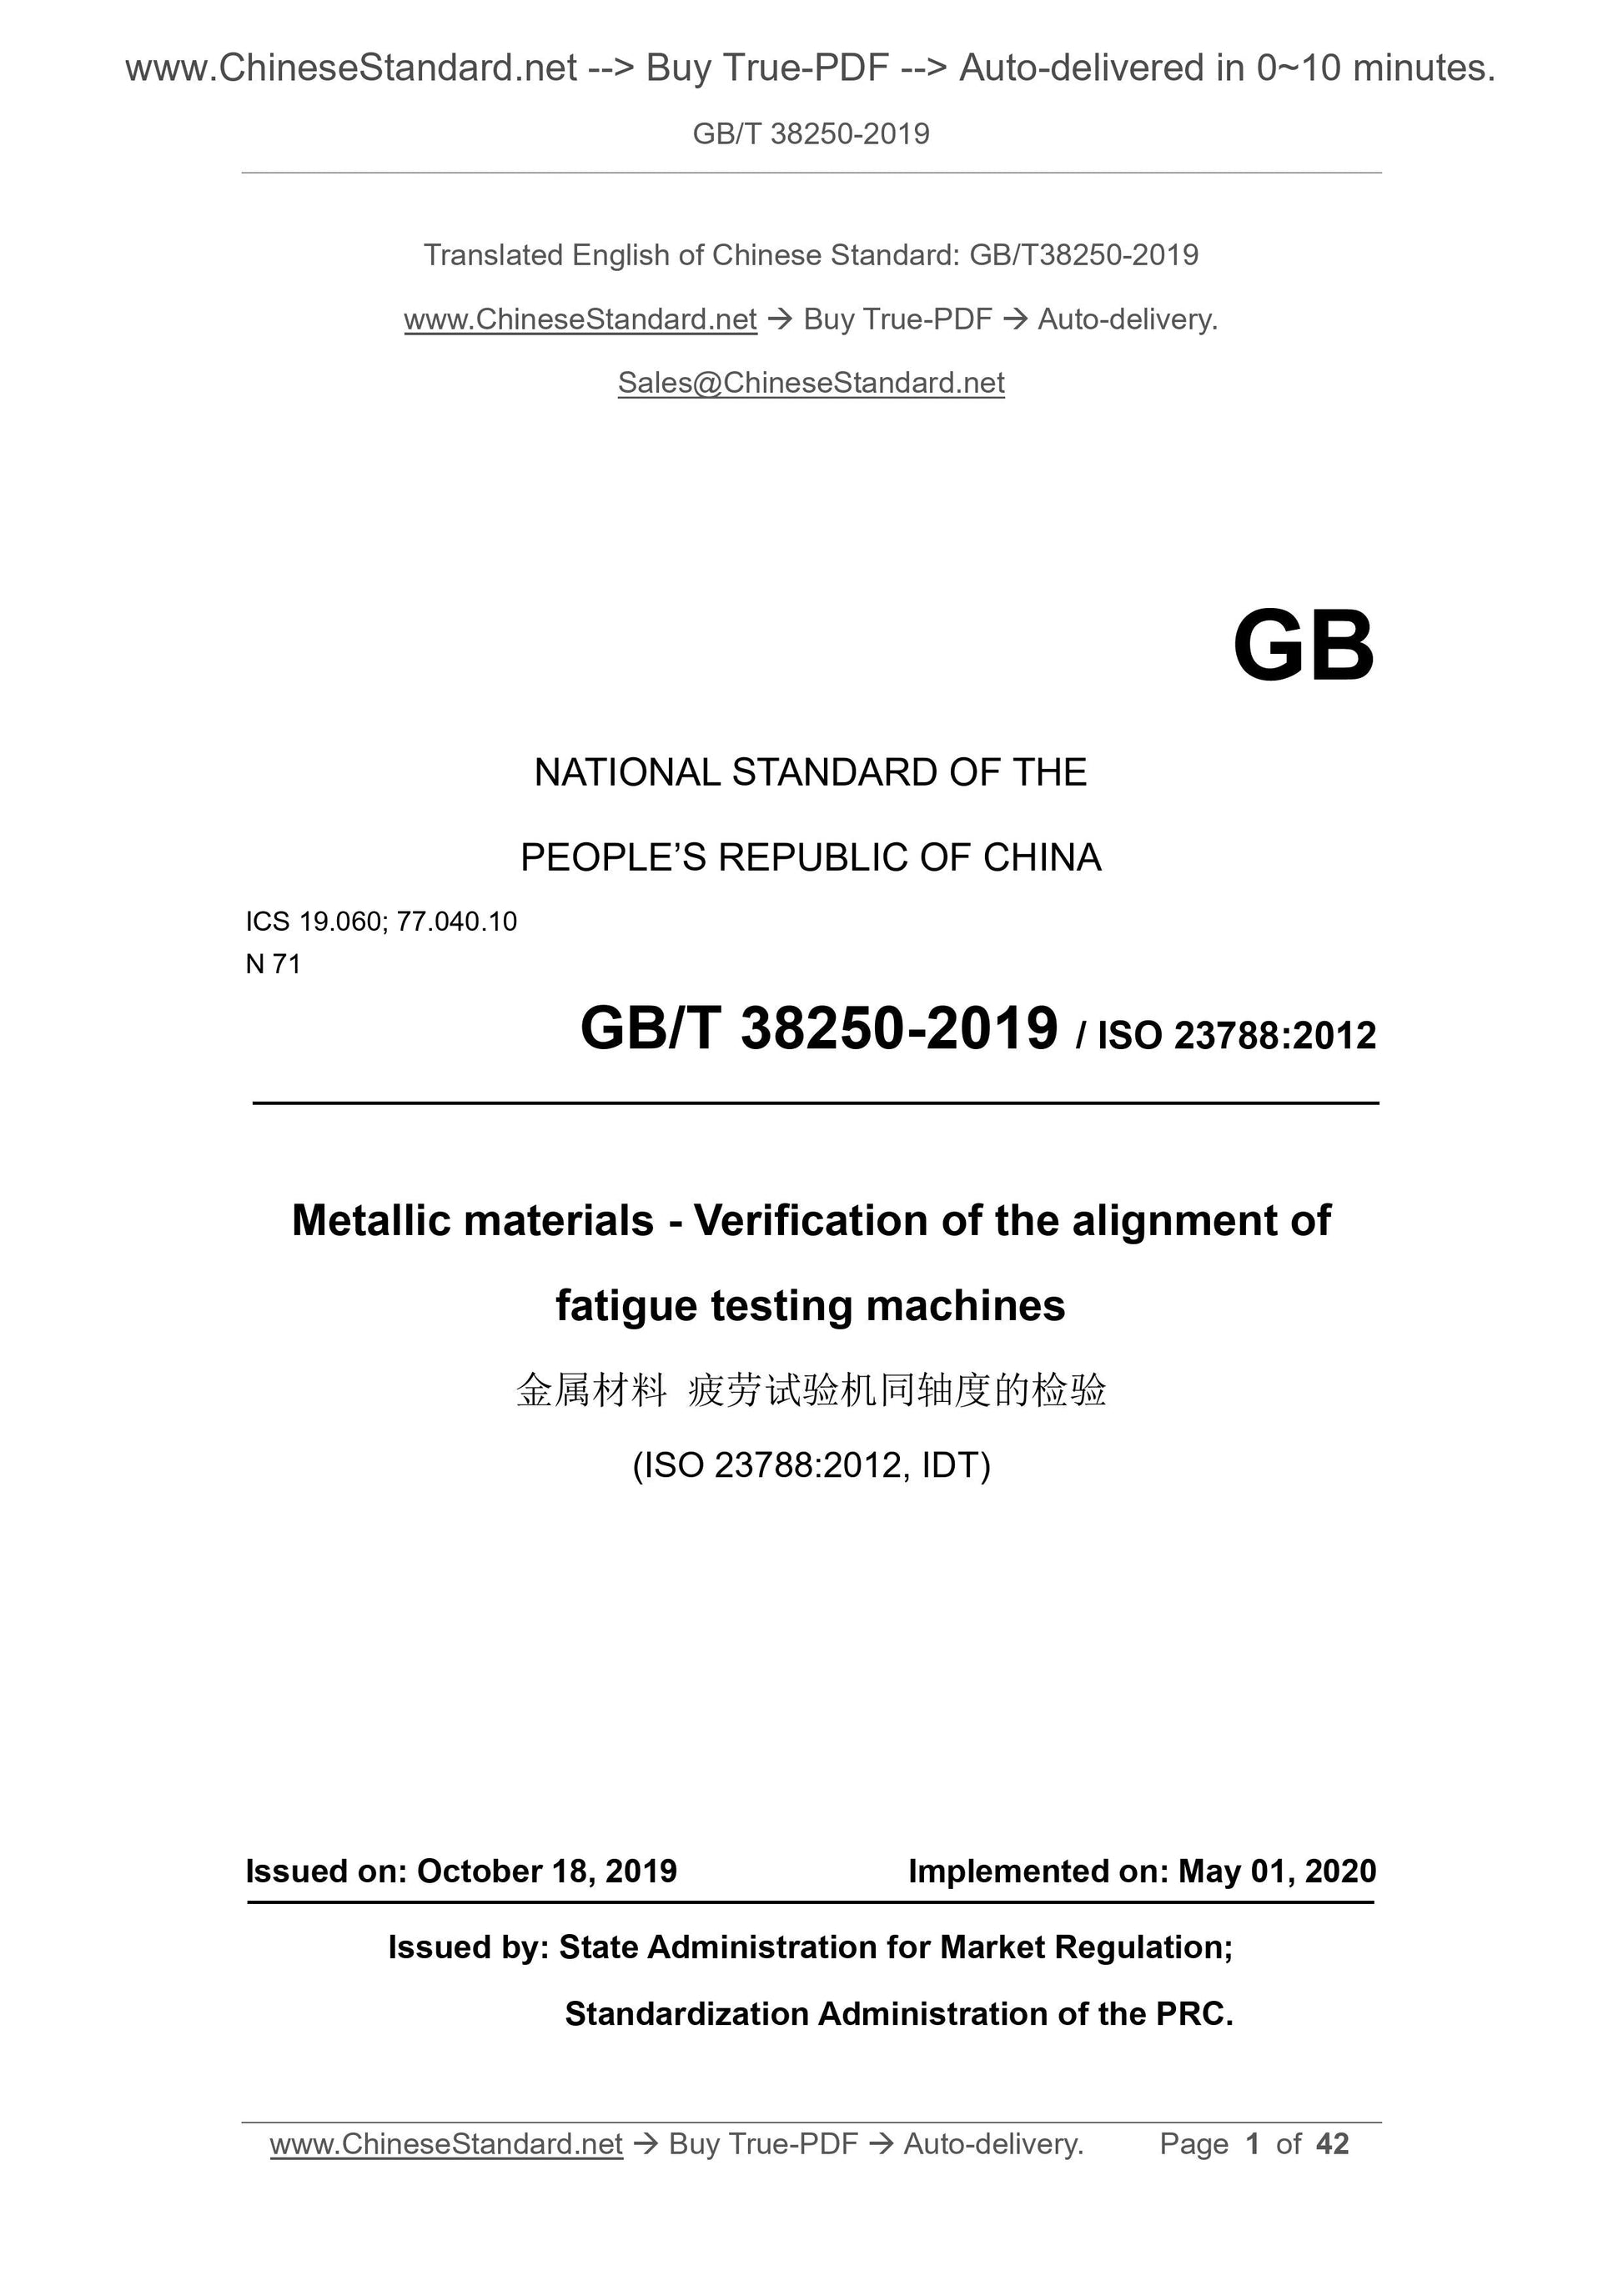 GB/T 38250-2019 Page 1